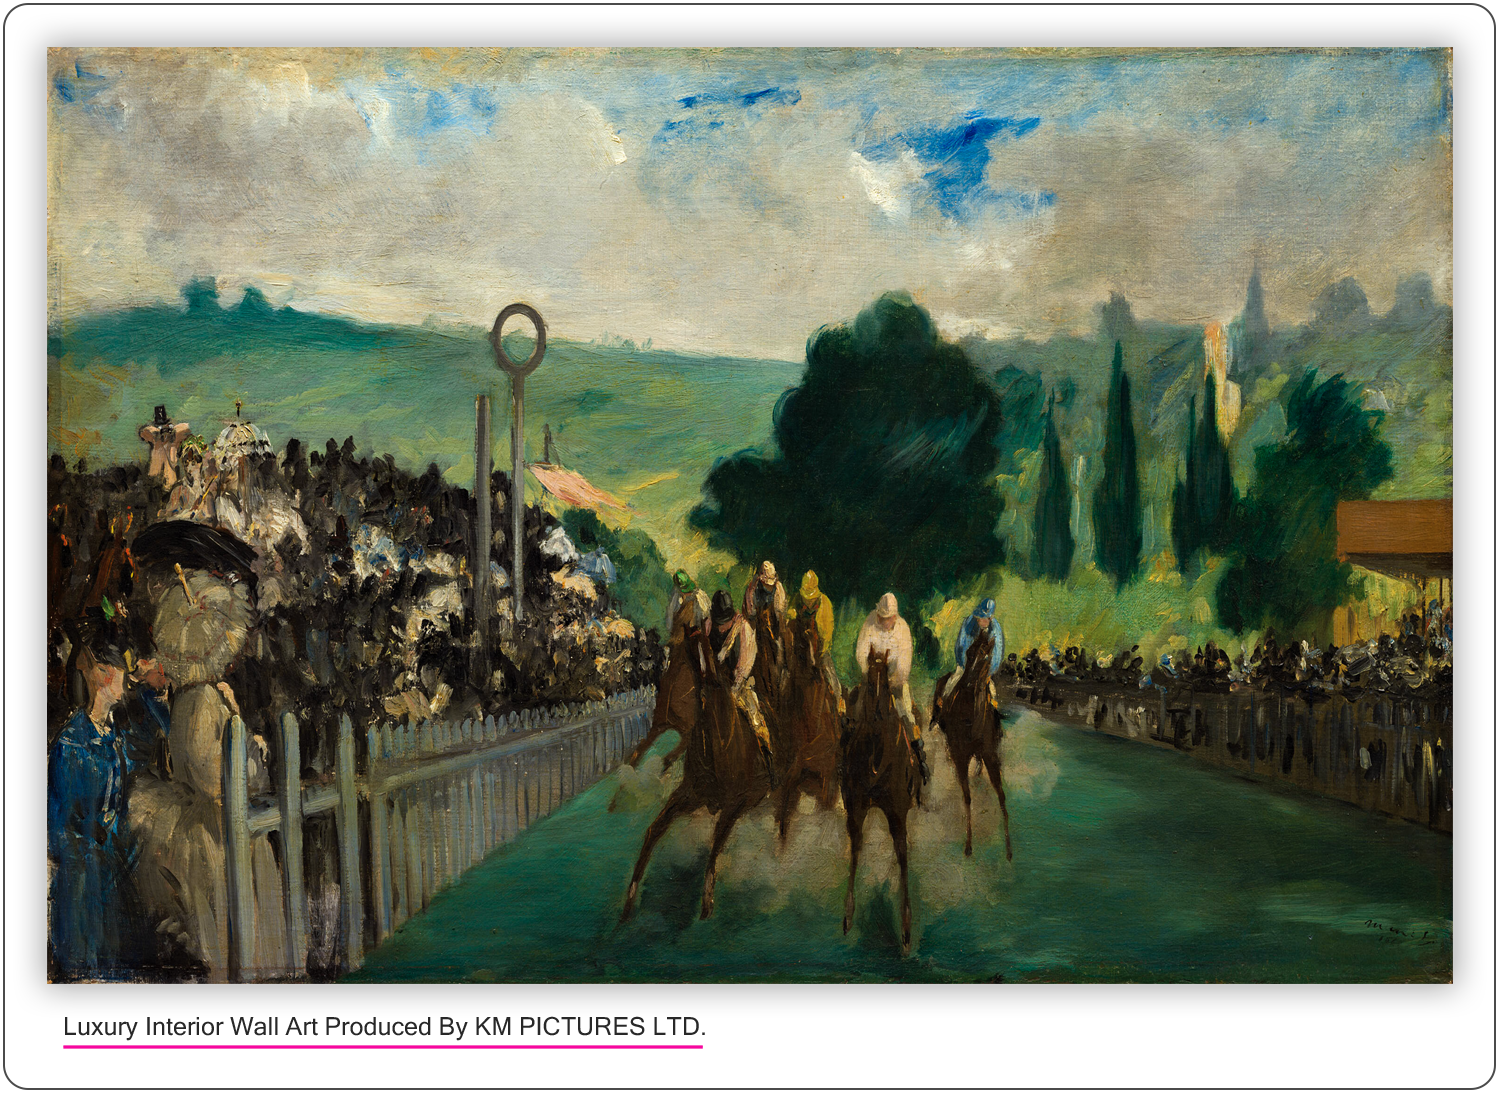 The Races at Longchamp, 1866